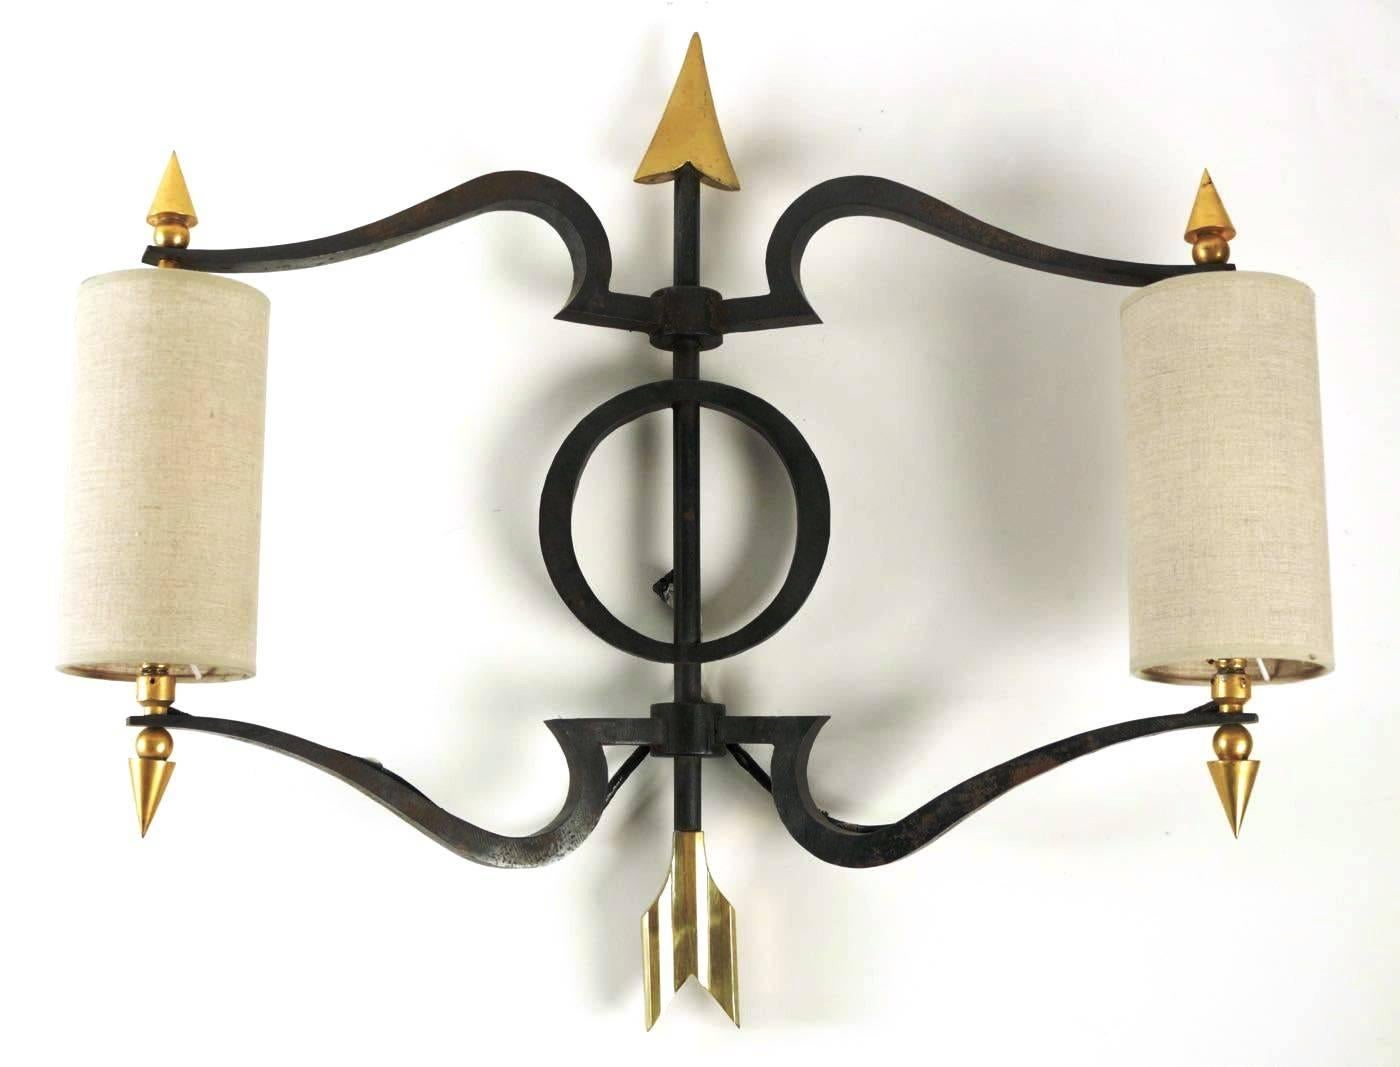 Spectacular Pair of Bronze Wall Lights by Jacques Tournus, France, 1940s (Französisch)